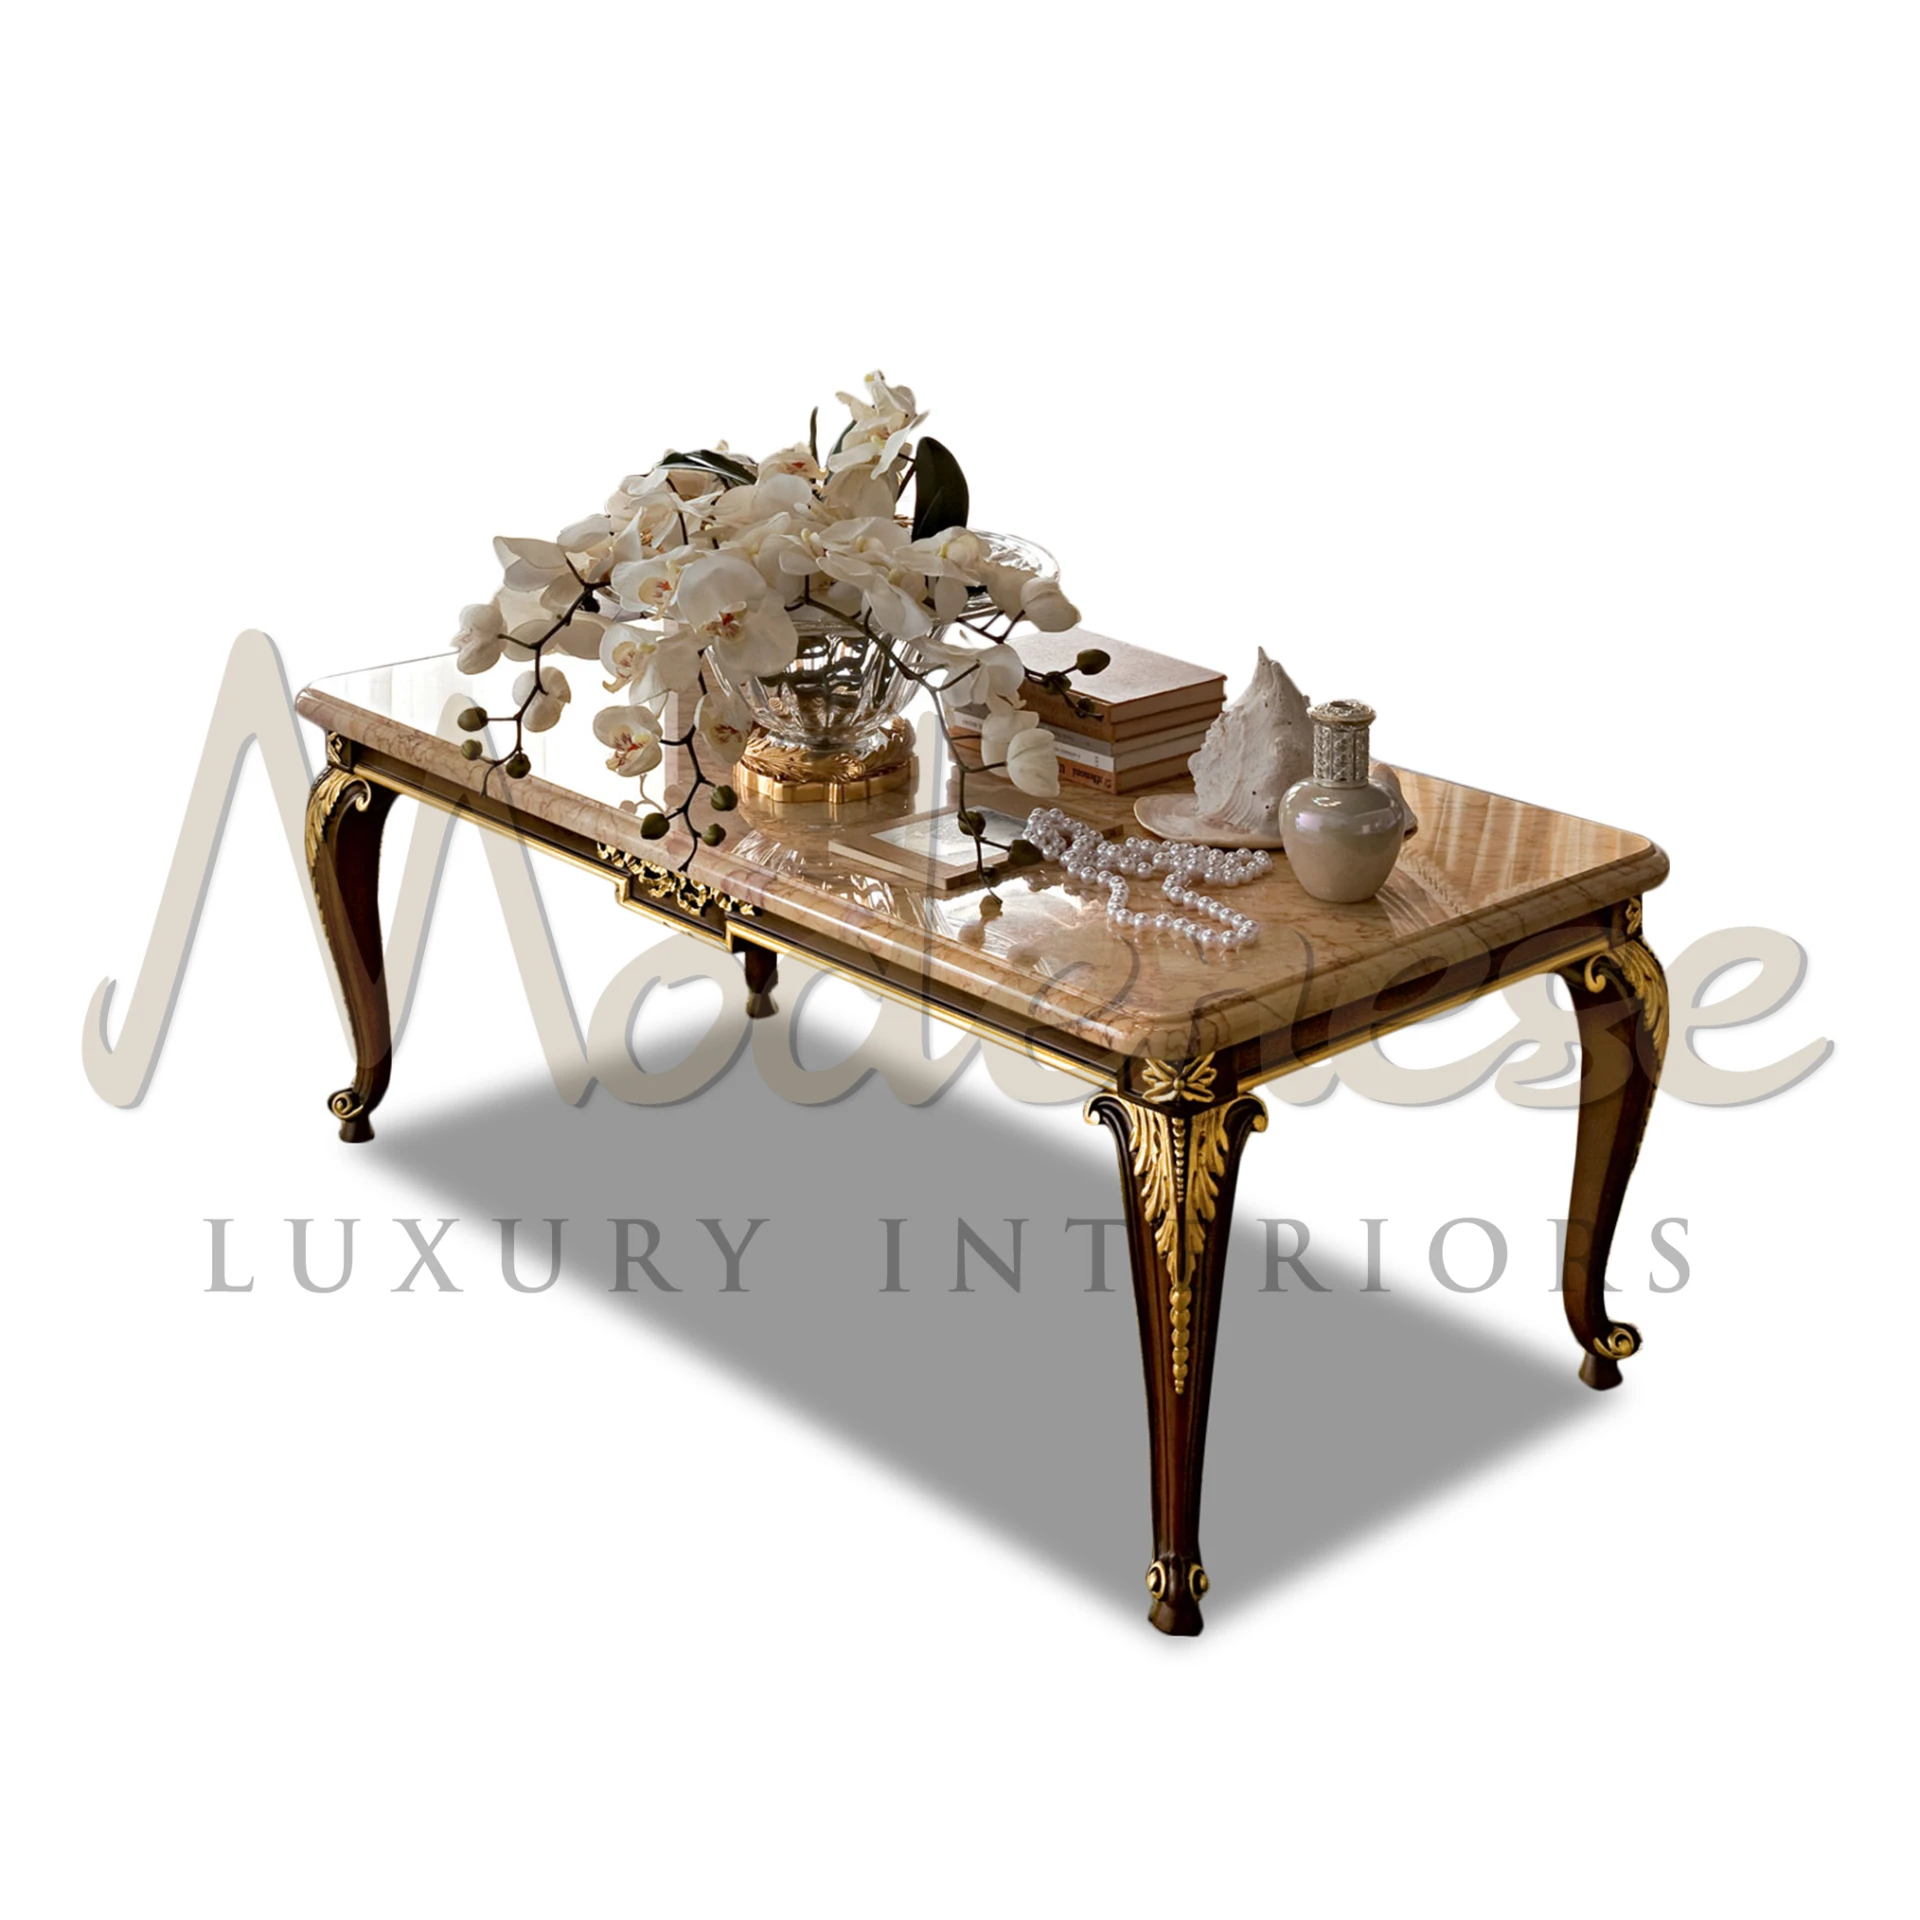 Luxury coffee table by Modernese with intricate baroque style elements, perfect for classic furniture enthusiasts.
